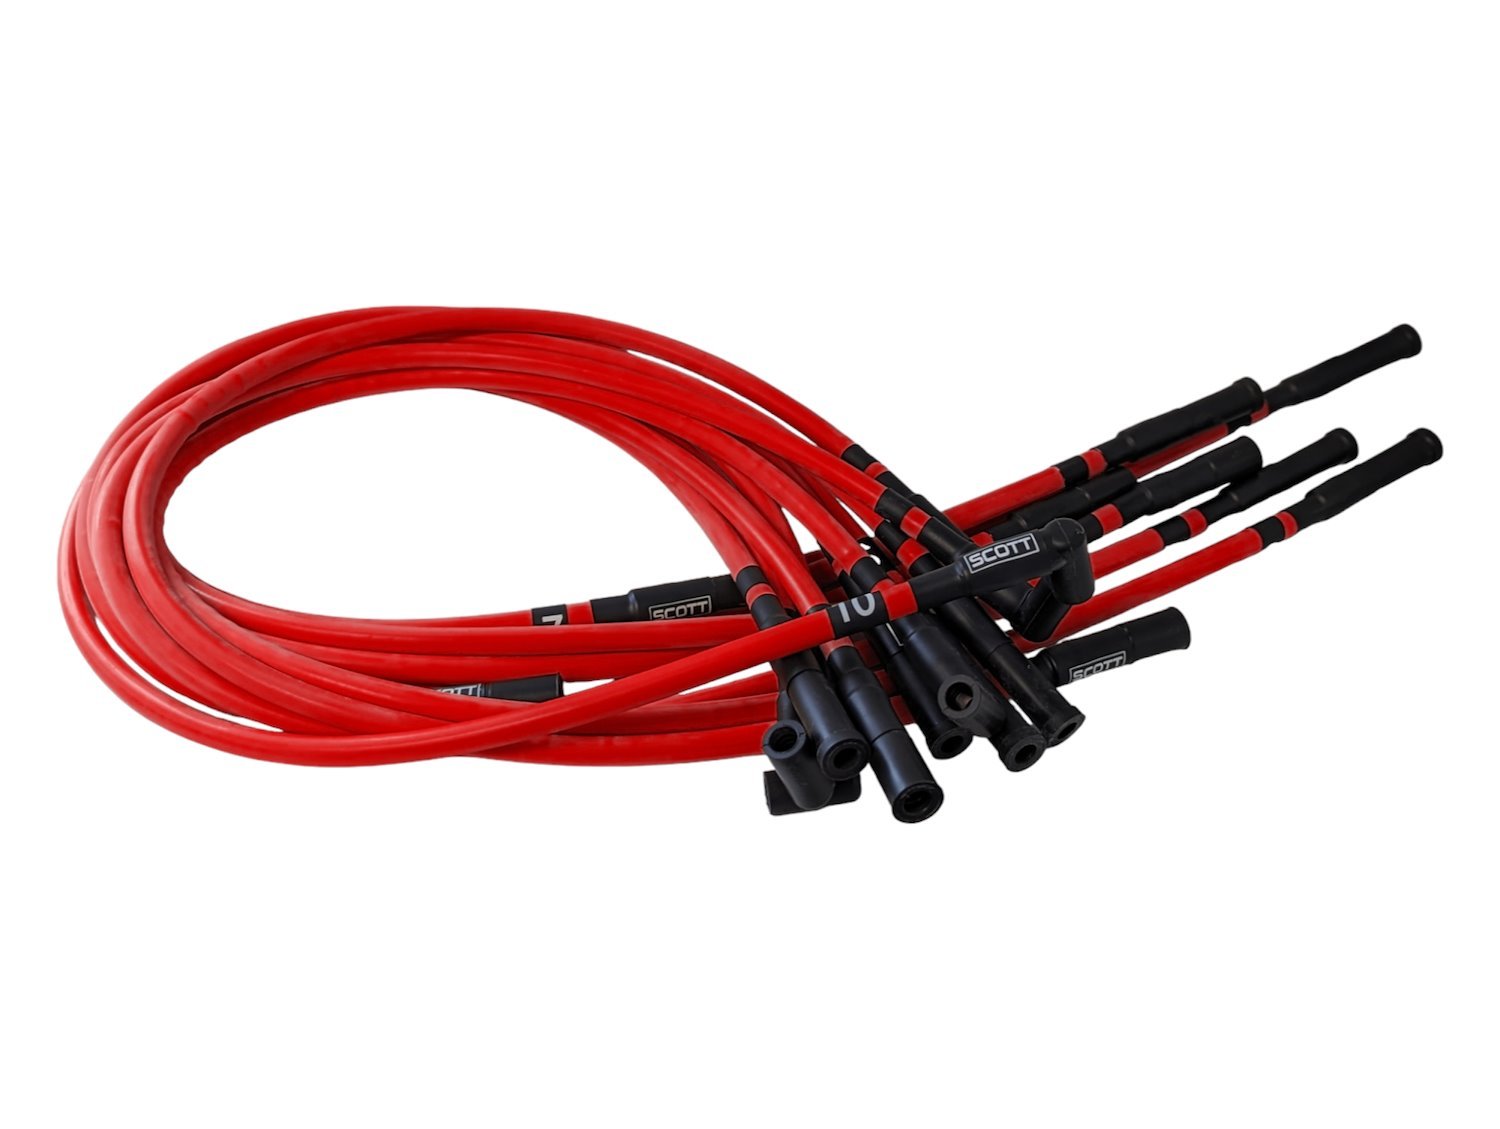 SPW300-CH-690-III-2 Super Mag Fiberglass-Oversleeved Spark Plug Wire Set for Dodge Viper Gen3 [Red]